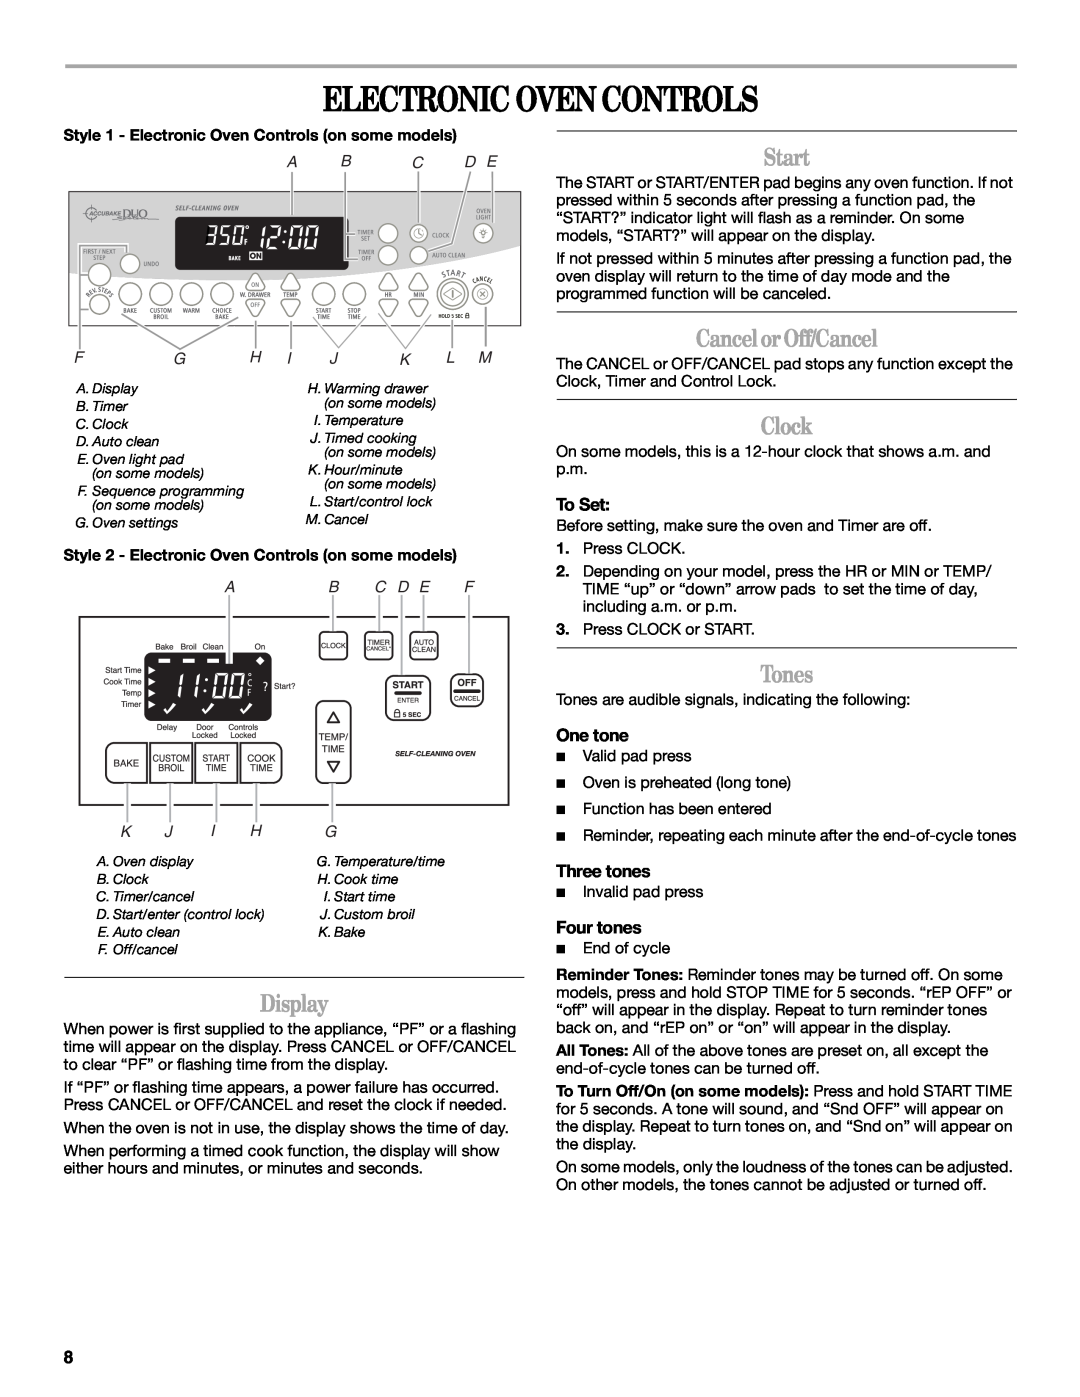 Whirlpool 9761040 manual Electronic Oven Controls, Display, Start, Cancel or Off/Cancel, Clock, Tones, To Set, One tone 